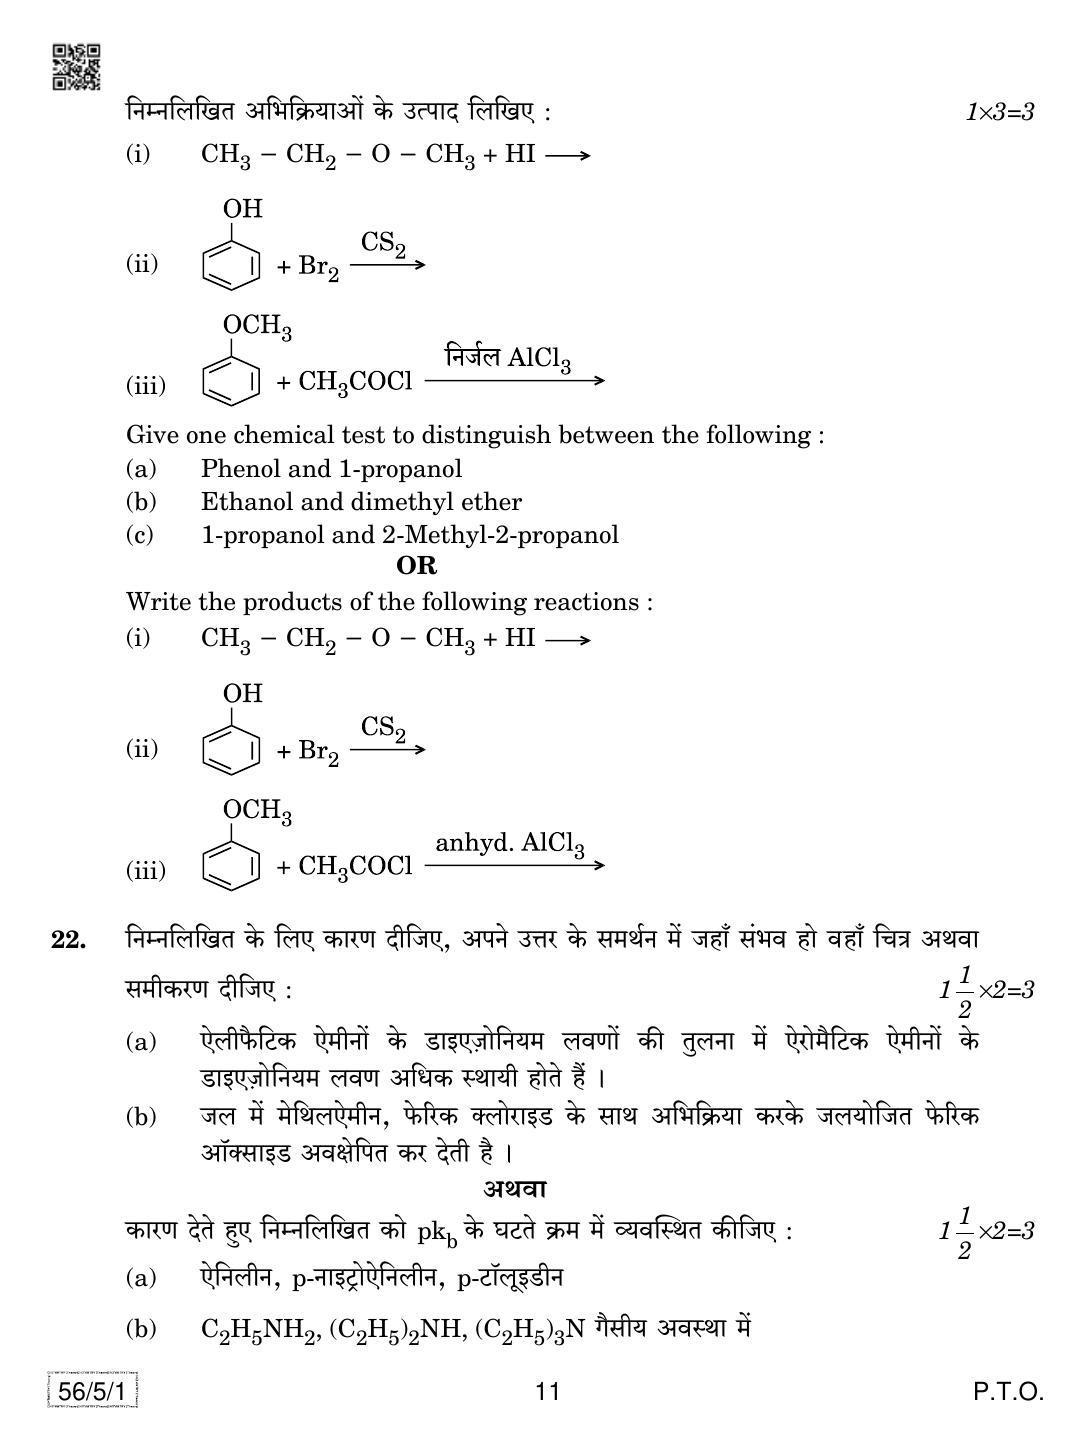 CBSE Class 12 56-5-1 Chemistry 2019 Question Paper - Page 11